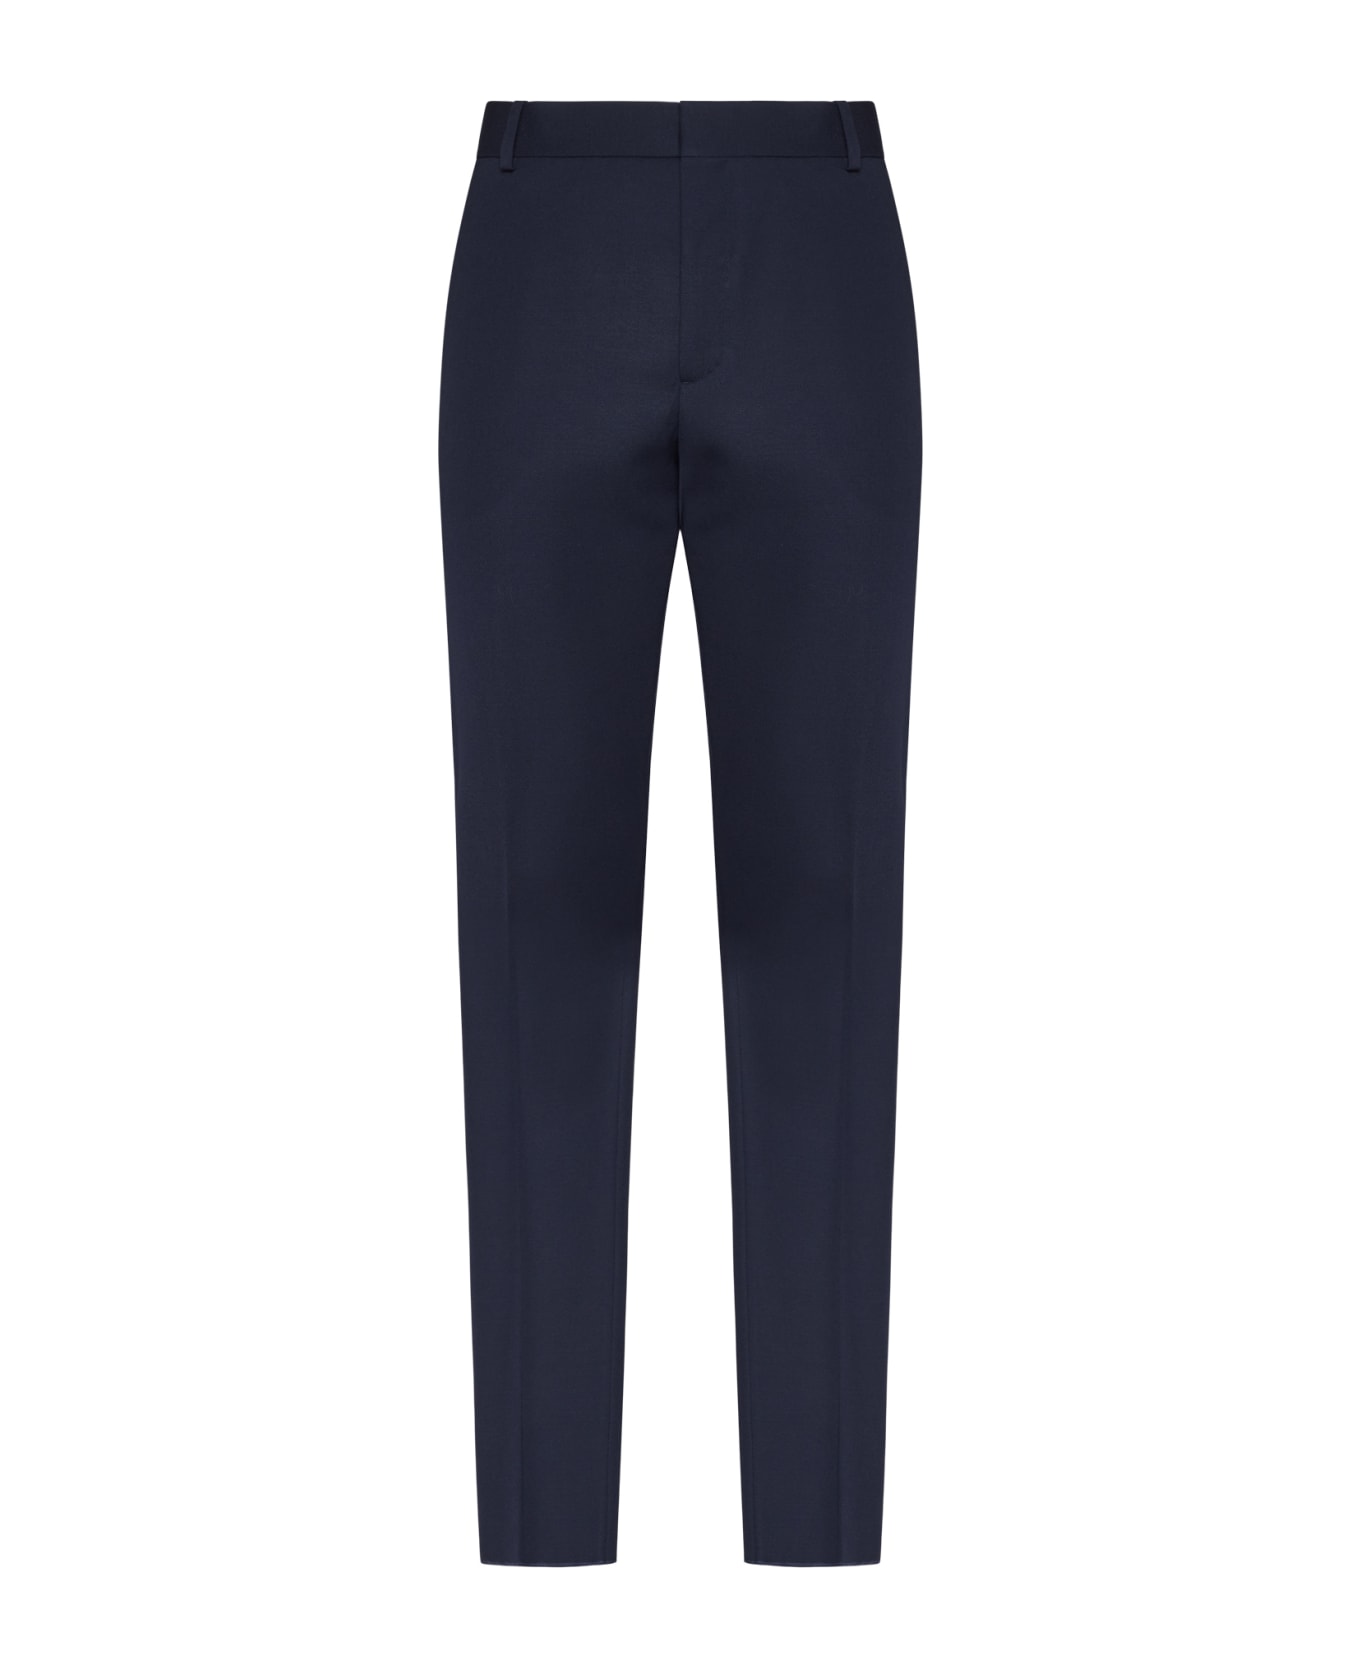 Alexander McQueen Tailored Cigarette Pants - Bright navy ボトムス